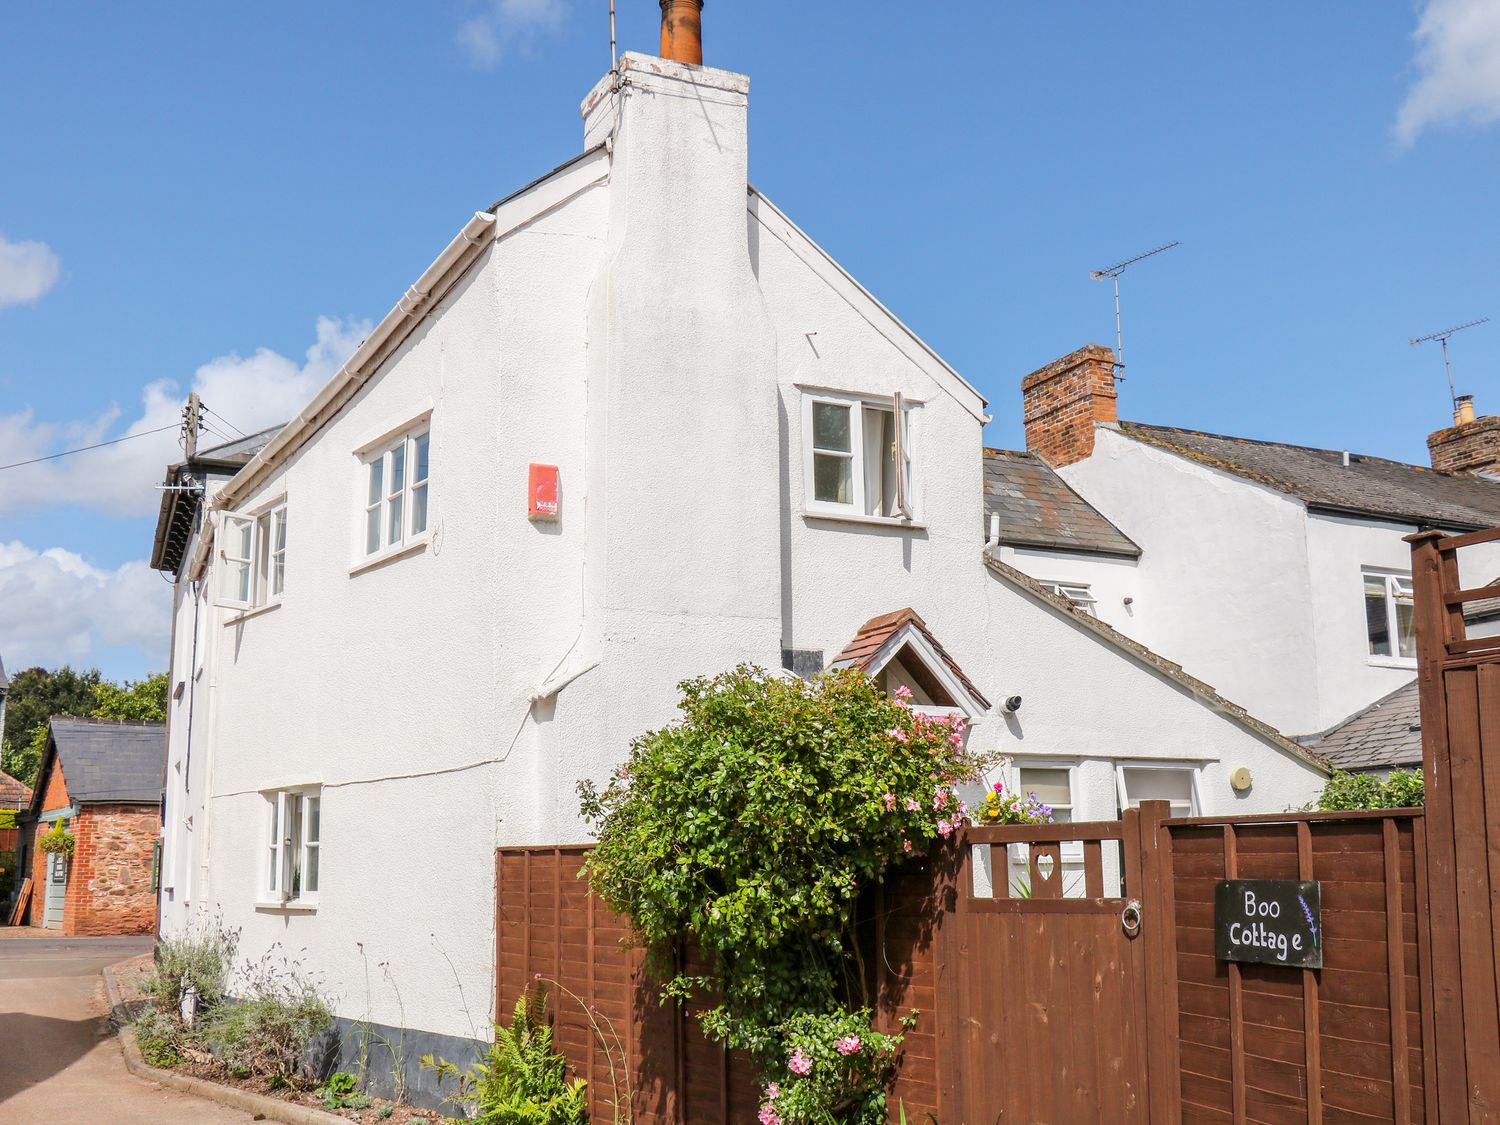 Boo Cottage - Somerset & Wiltshire - 1011669 - photo 1